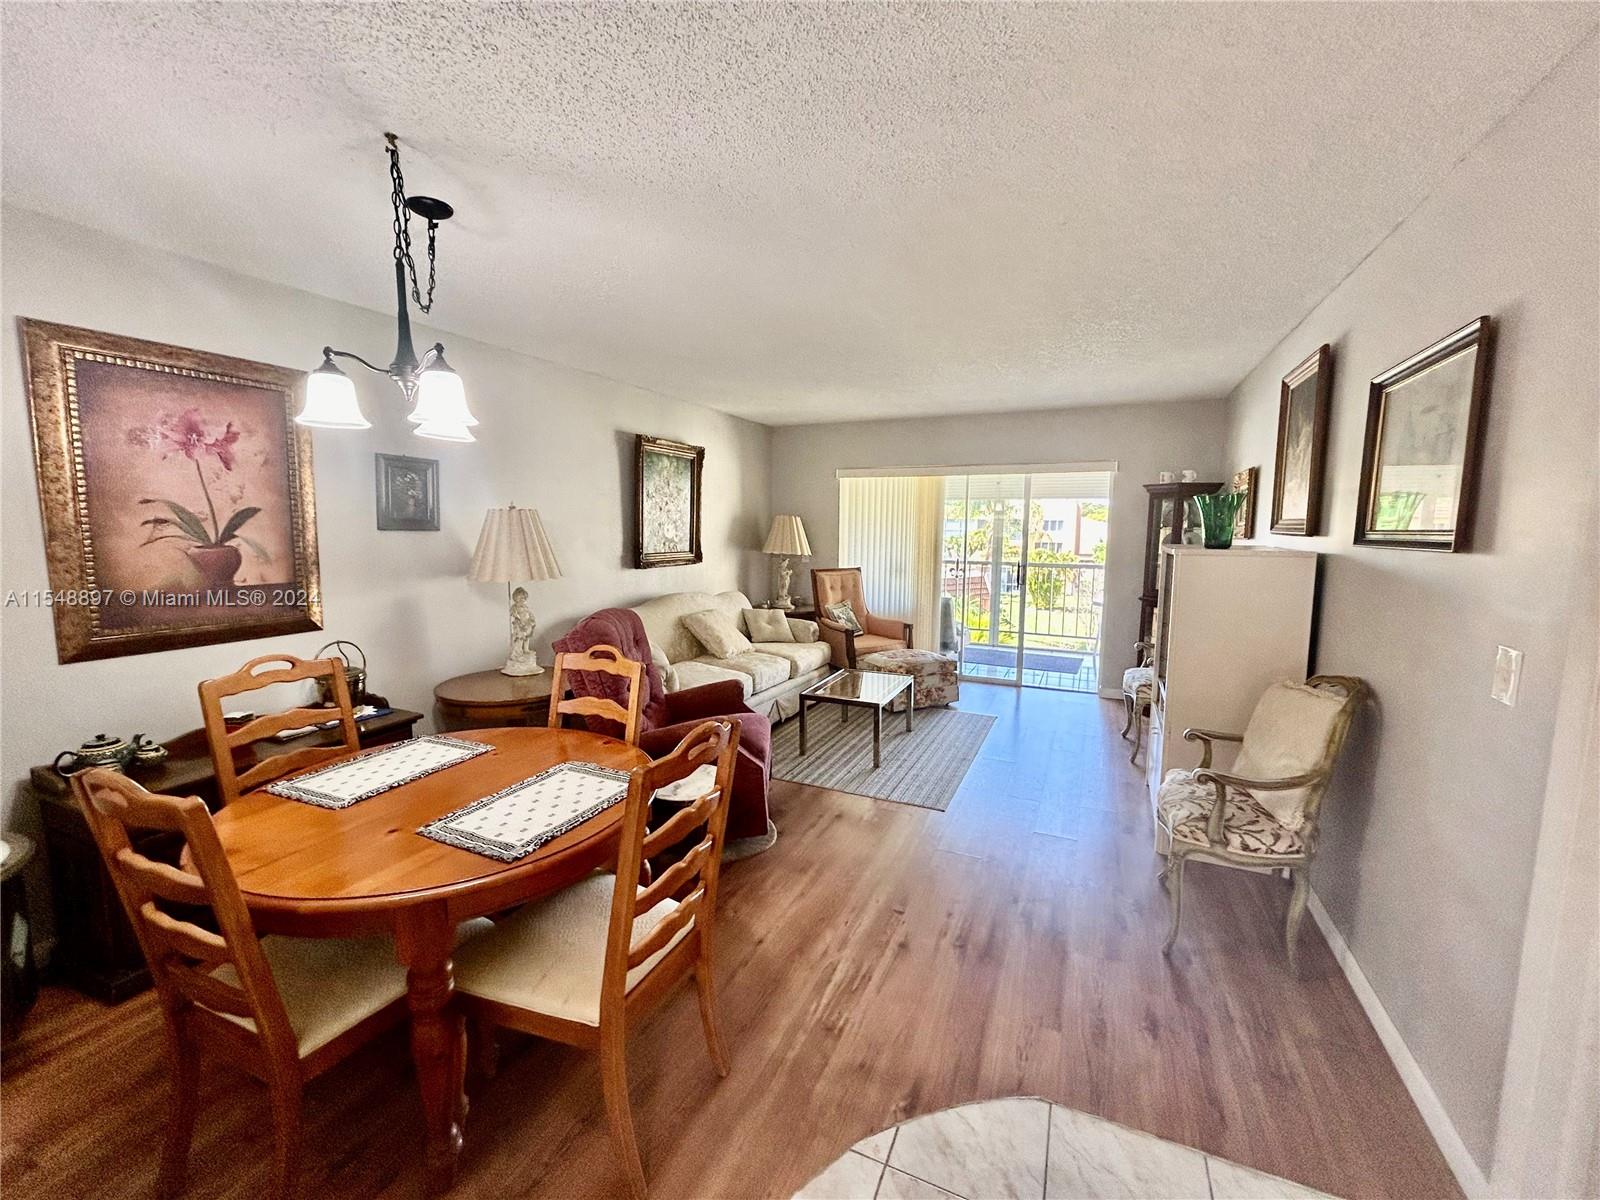 6700 N Royal Palm Blvd 304D, Margate, Florida 33063, 1 Bedroom Bedrooms, ,1 BathroomBathrooms,Residential,For Sale,6700 N Royal Palm Blvd 304D,A11548897